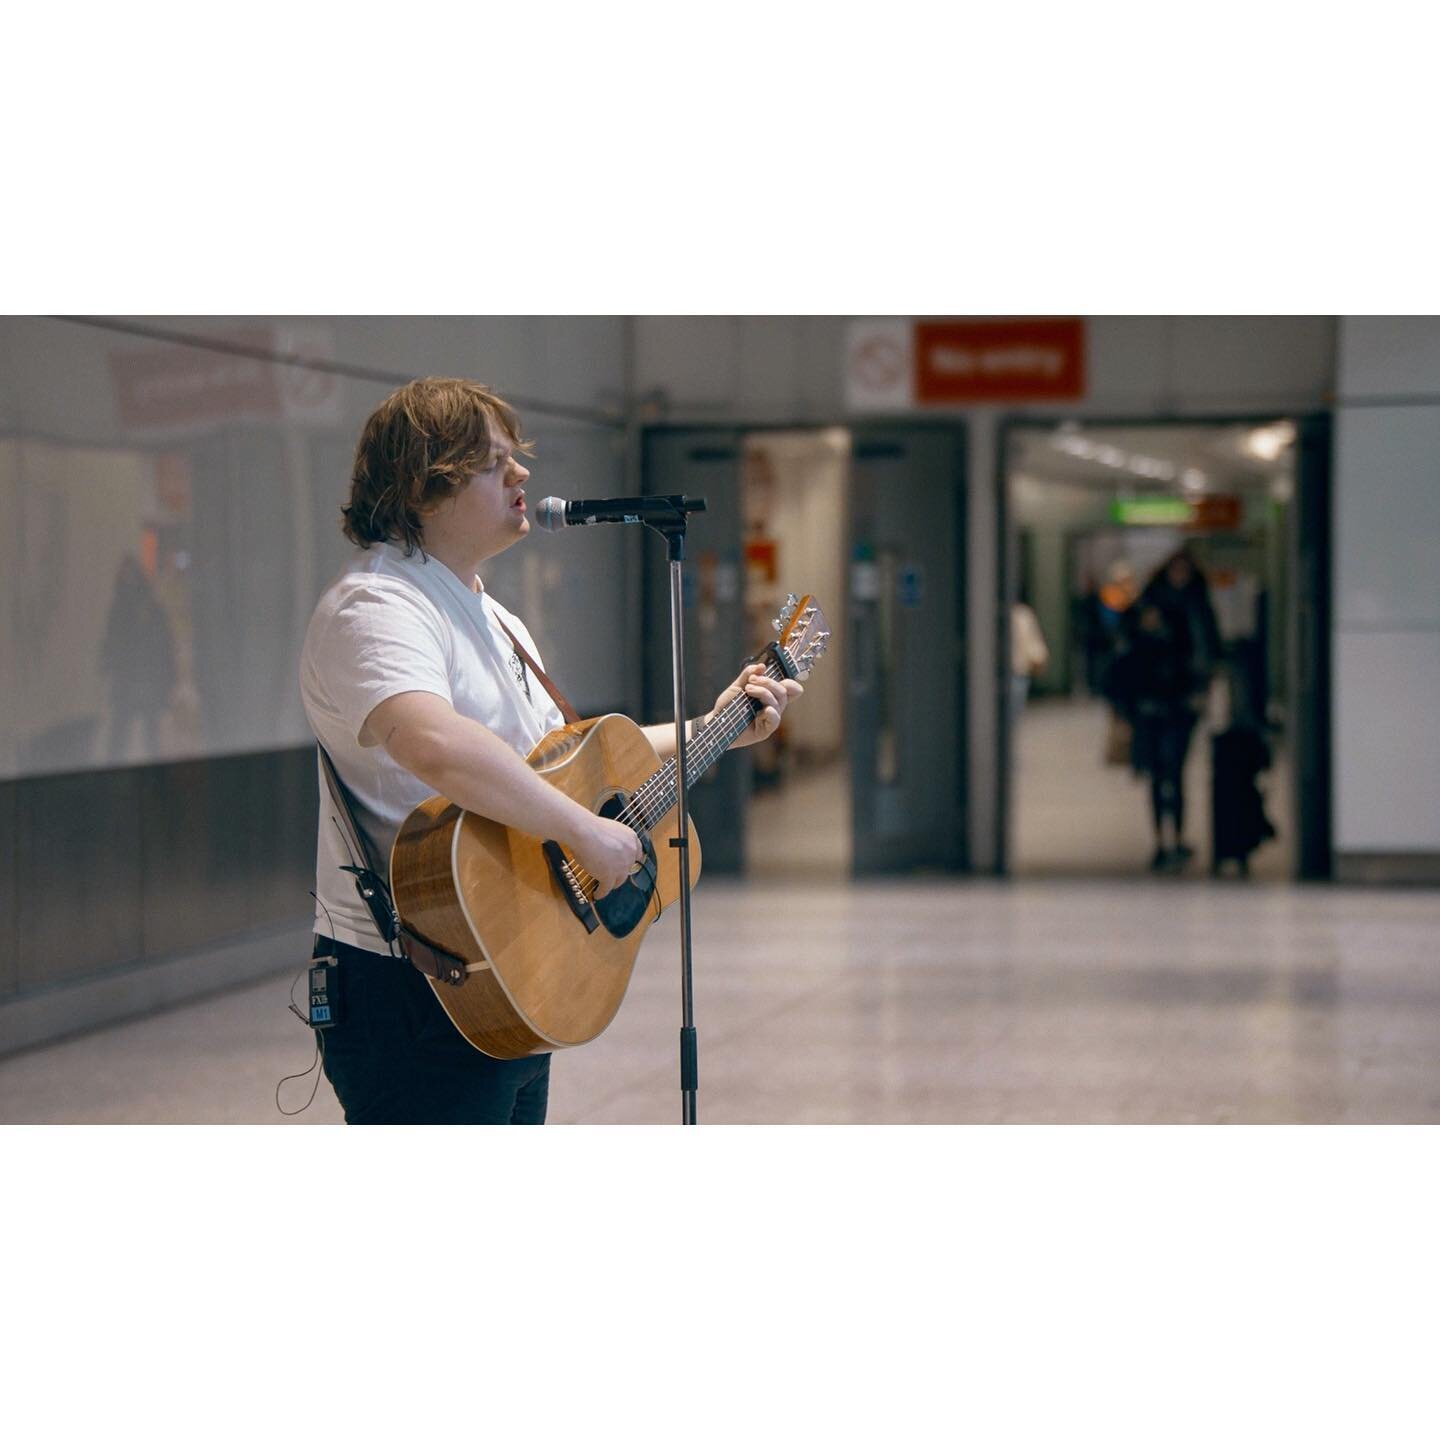 Lewis Capaldi - Wish You The Best (Airport arrivals performance)

This was a joy.  Capturing such beautiful and genuine emotions reminded me of why we do what we do, and how great it is to love and be loved x
 
Director: @jimosaurusrex
Creative Direc